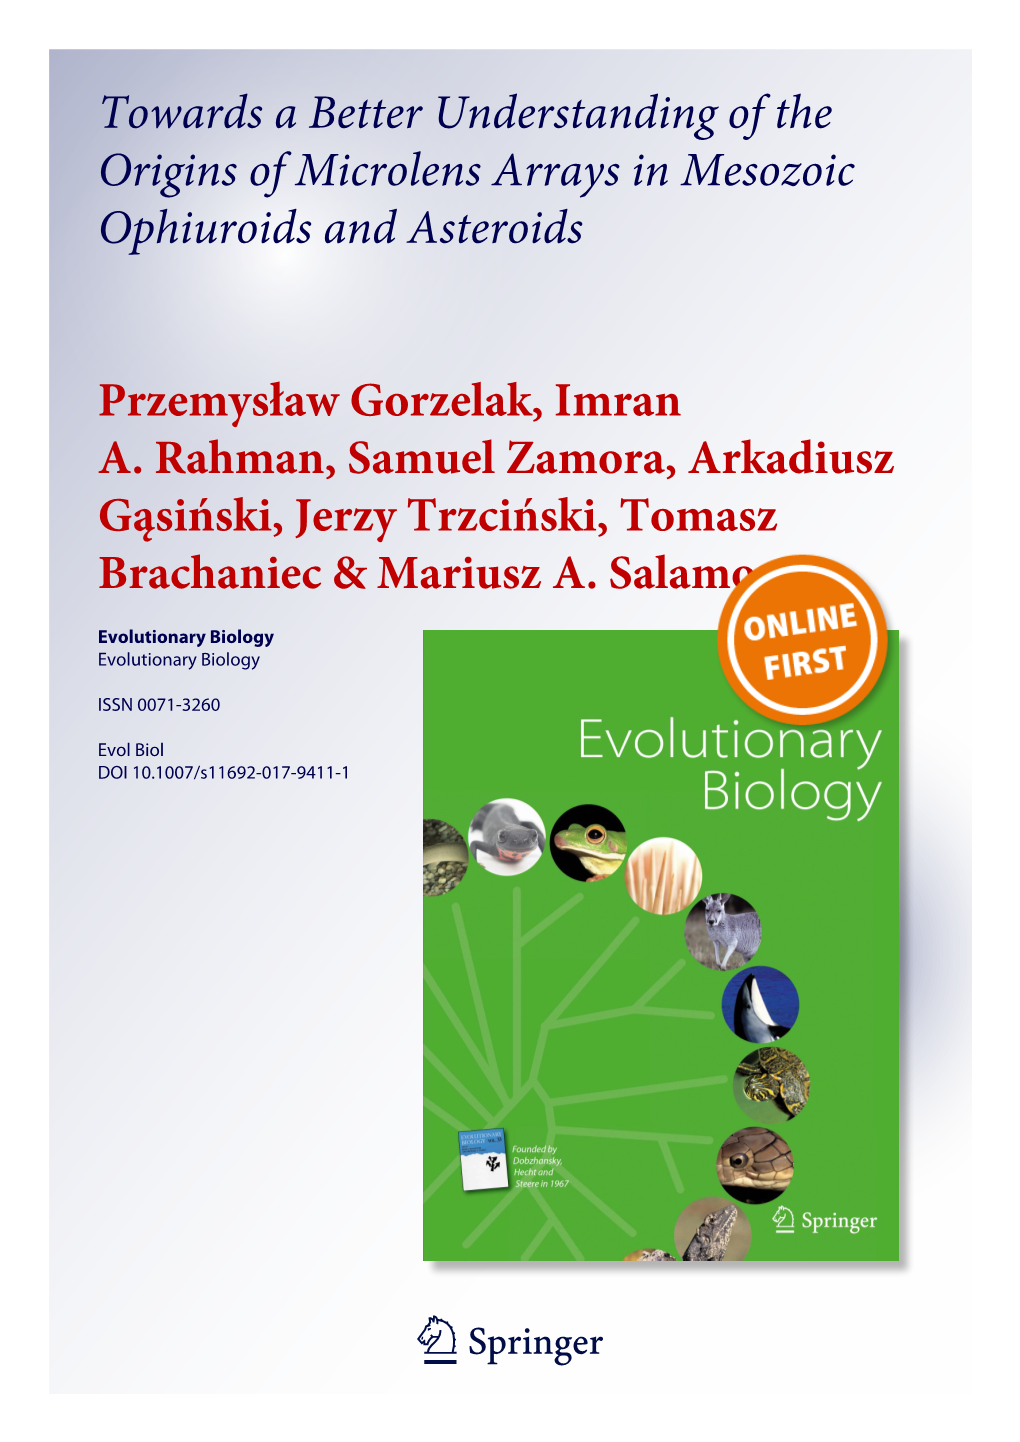 Towards a Better Understanding of the Origins of Microlens Arrays in Mesozoic Ophiuroids and Asteroids